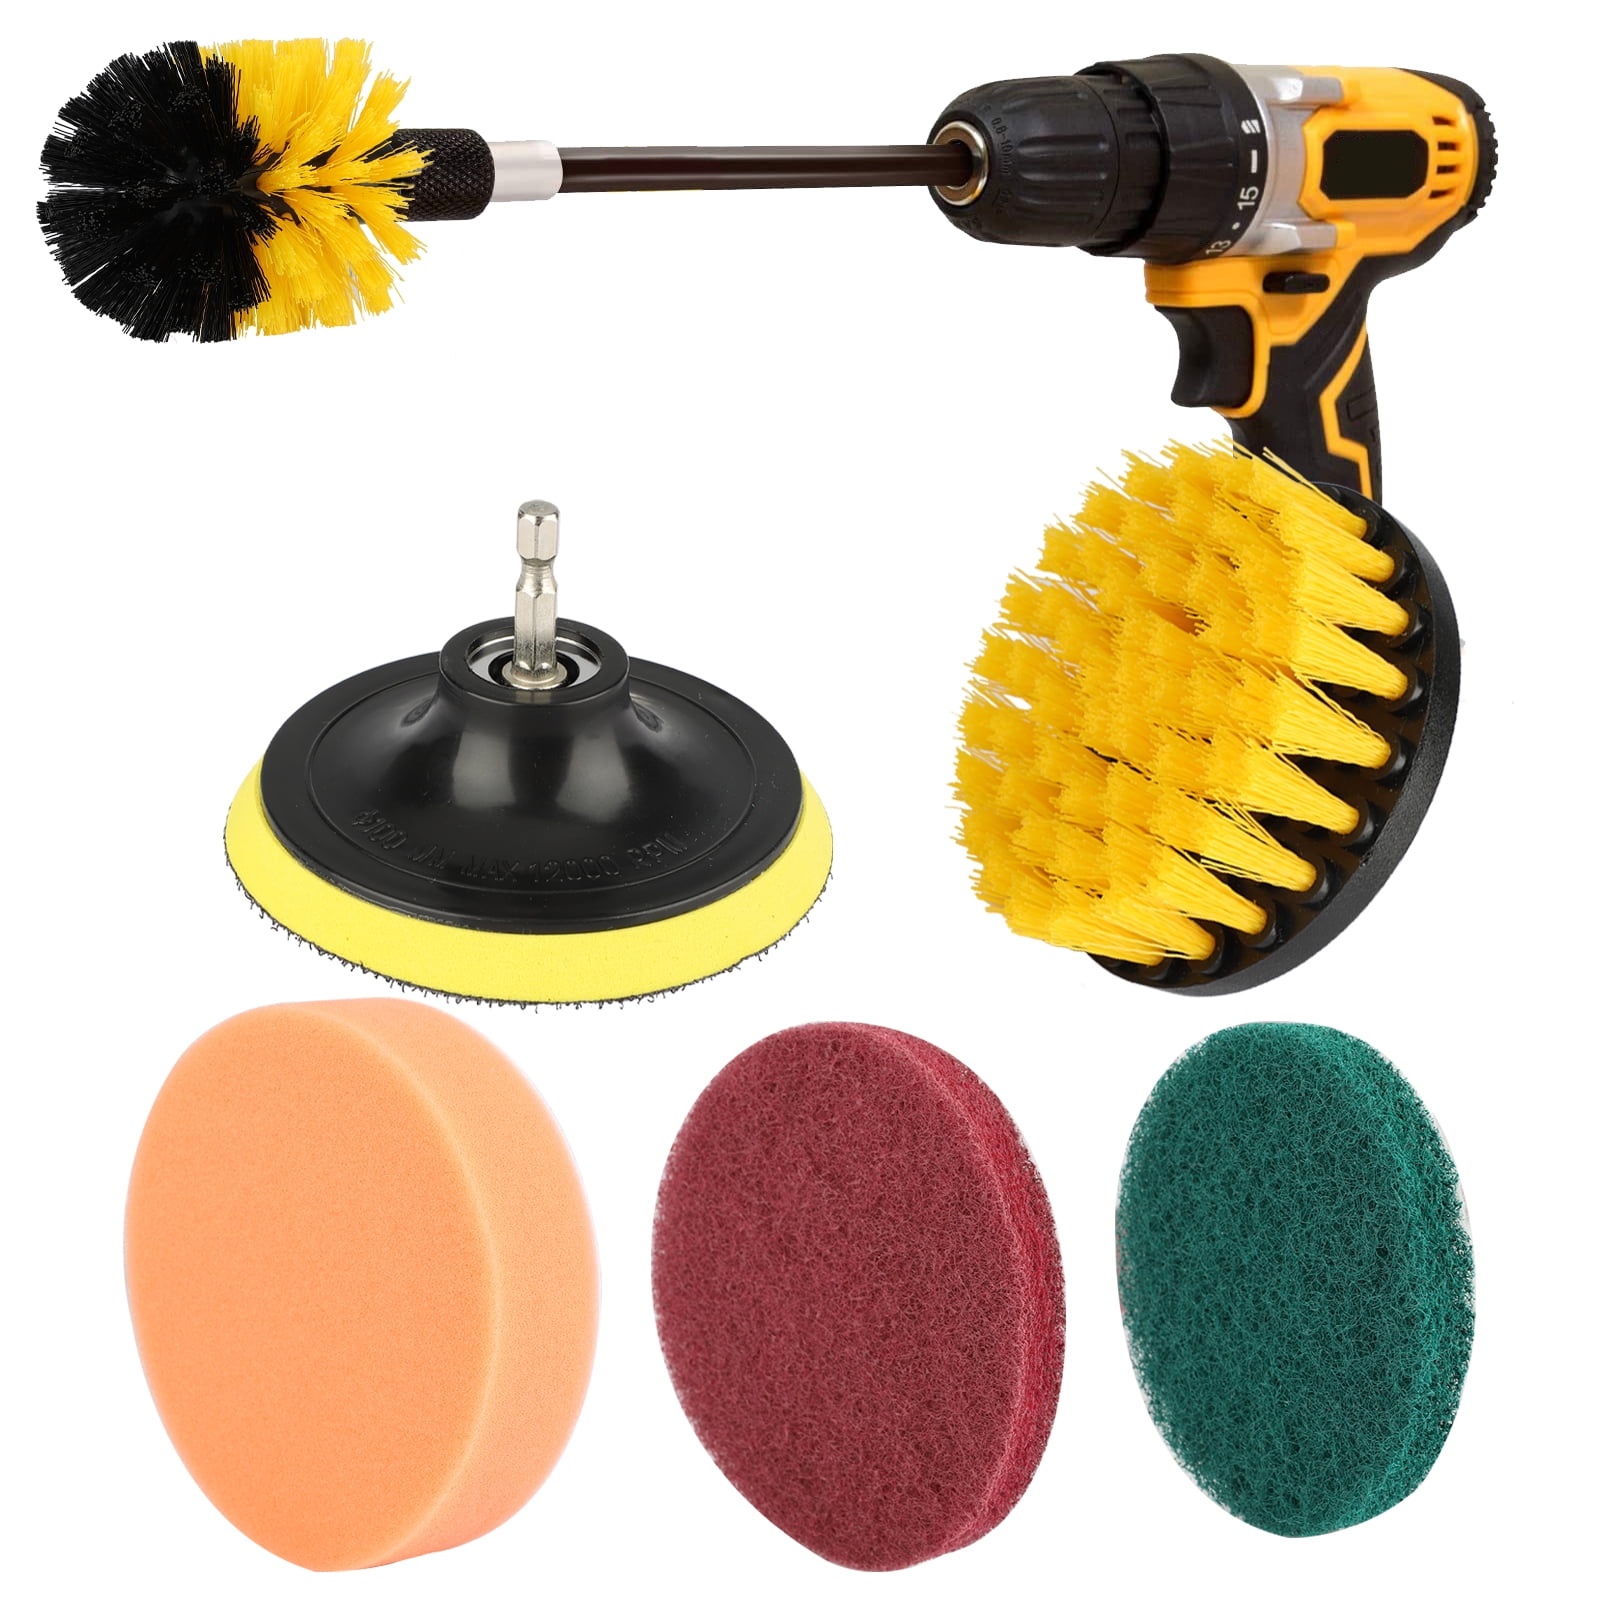 Car Cleaning Tool Kit, Car Detailing Brush Set, For Car Interior, Exterior,  Wheel Cleaning, Power Scrub Brush, Sponge Scrubber, Suitable For Car, Home,  Bathroom, Floor Tile, Wall, Cleaning Supplies, Cleaning Tool, Back